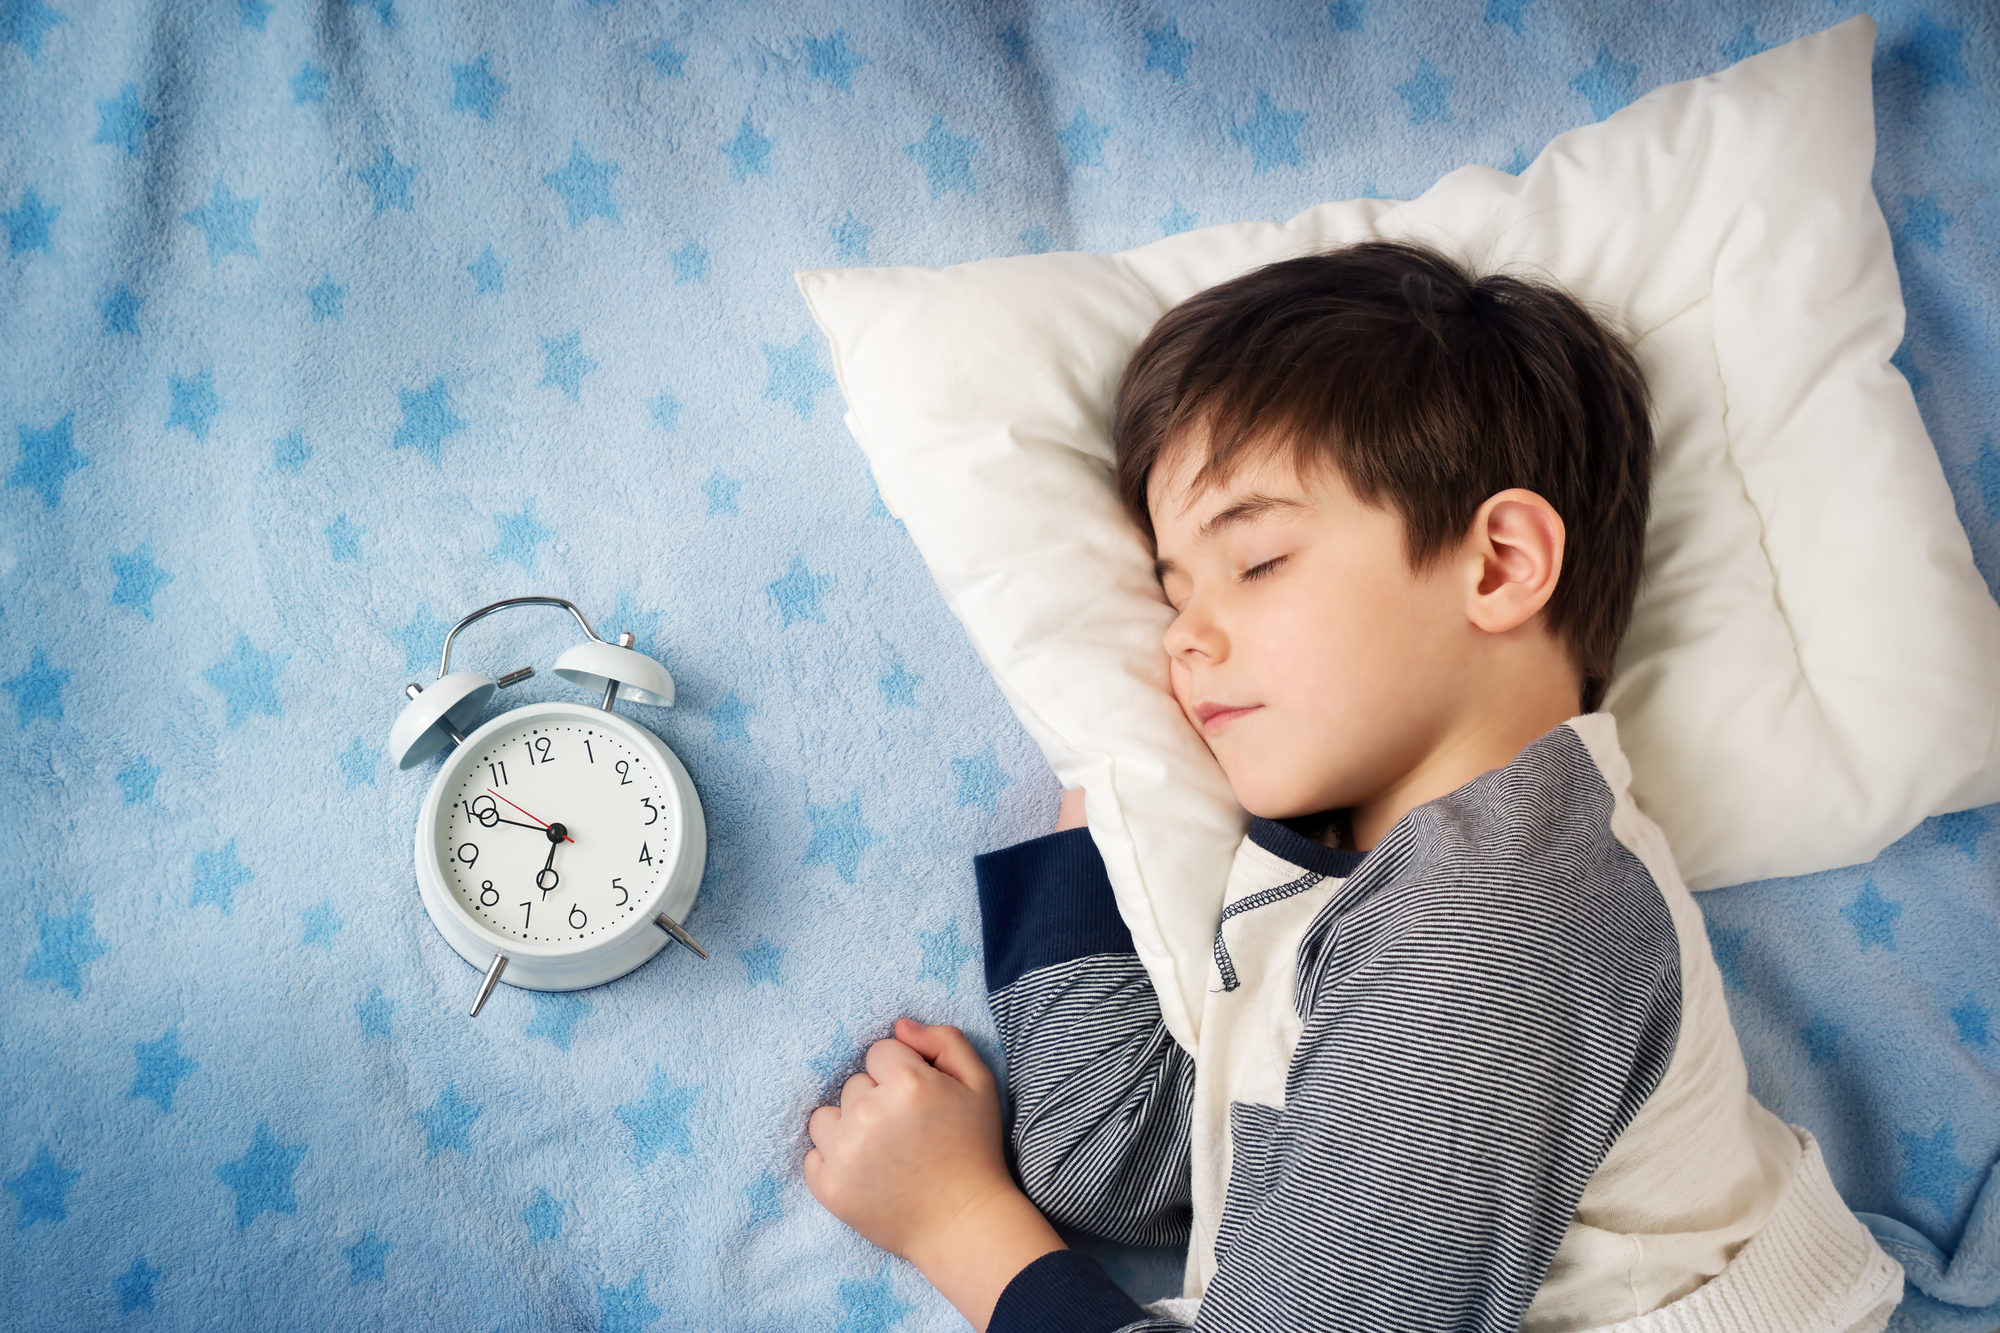 If your kid is having trouble at bedtime, they may be overtired or not tired enough. Try changing their sleep schedule to see if it helps. || Kid bedtime problems | sleep hacks for kids | toddler sleep regression | Awesome sleep hacks for children